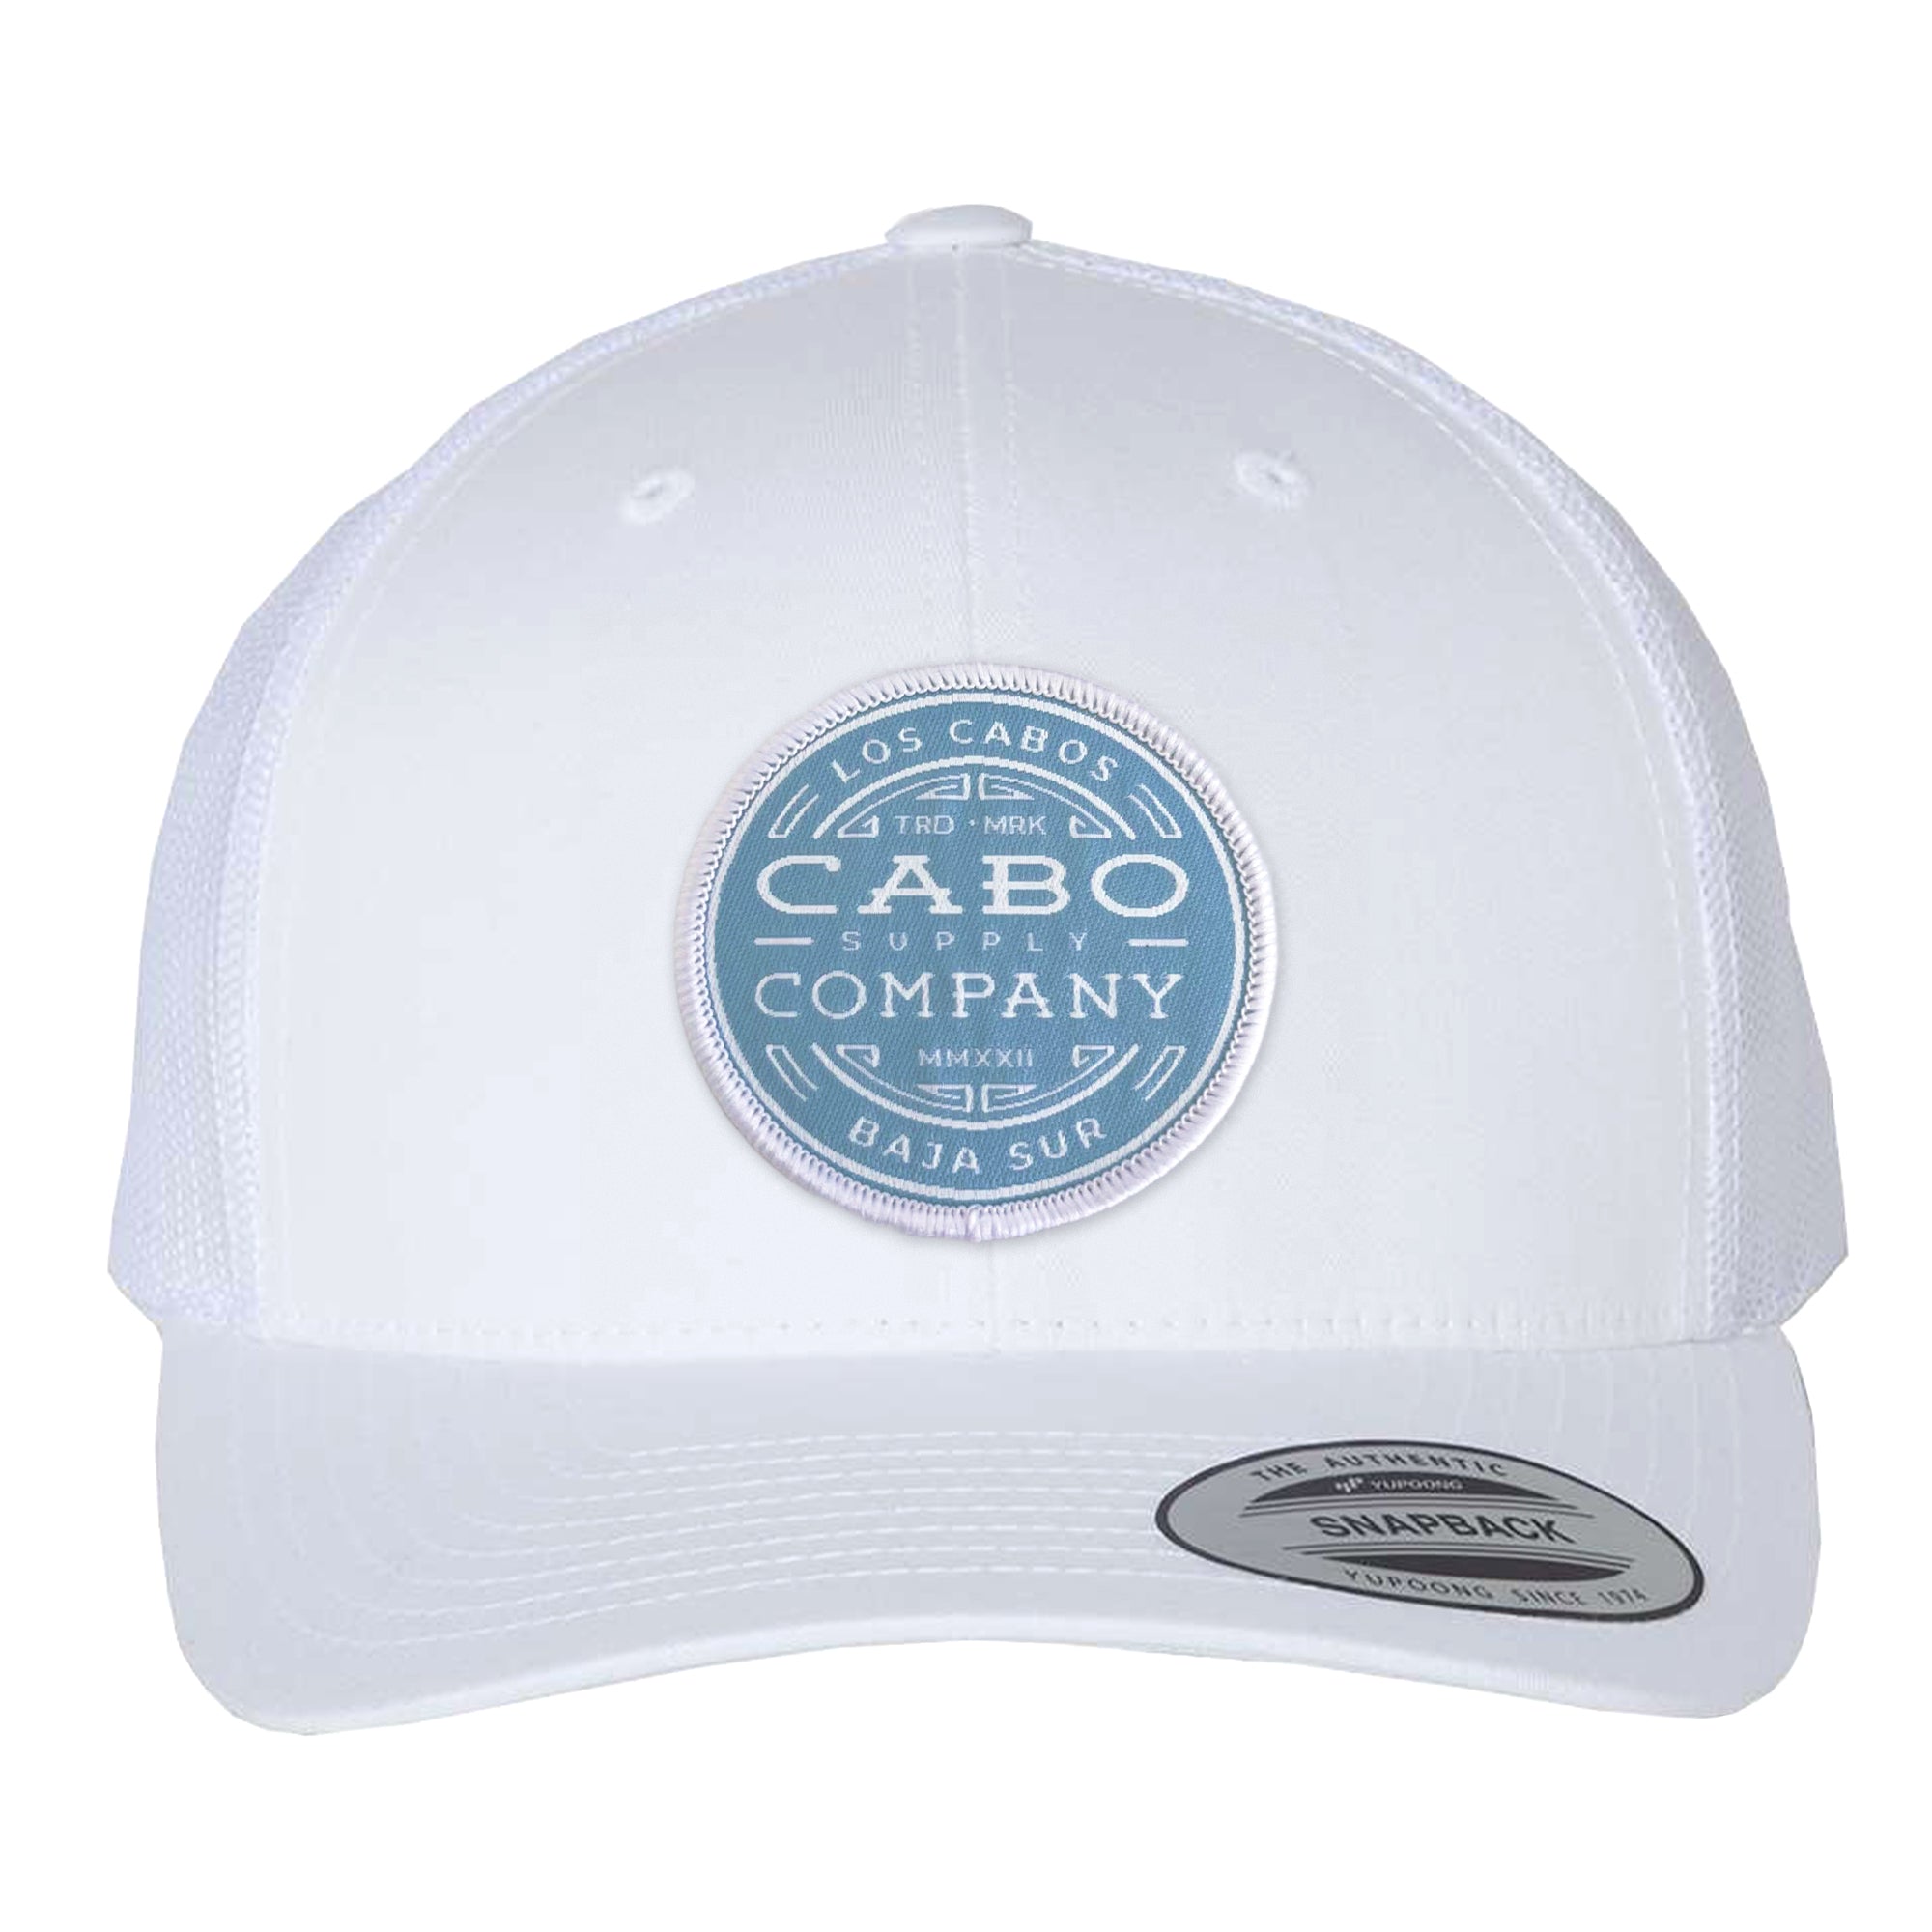 THE CABO LOCAL HAT (SNAPBACK)